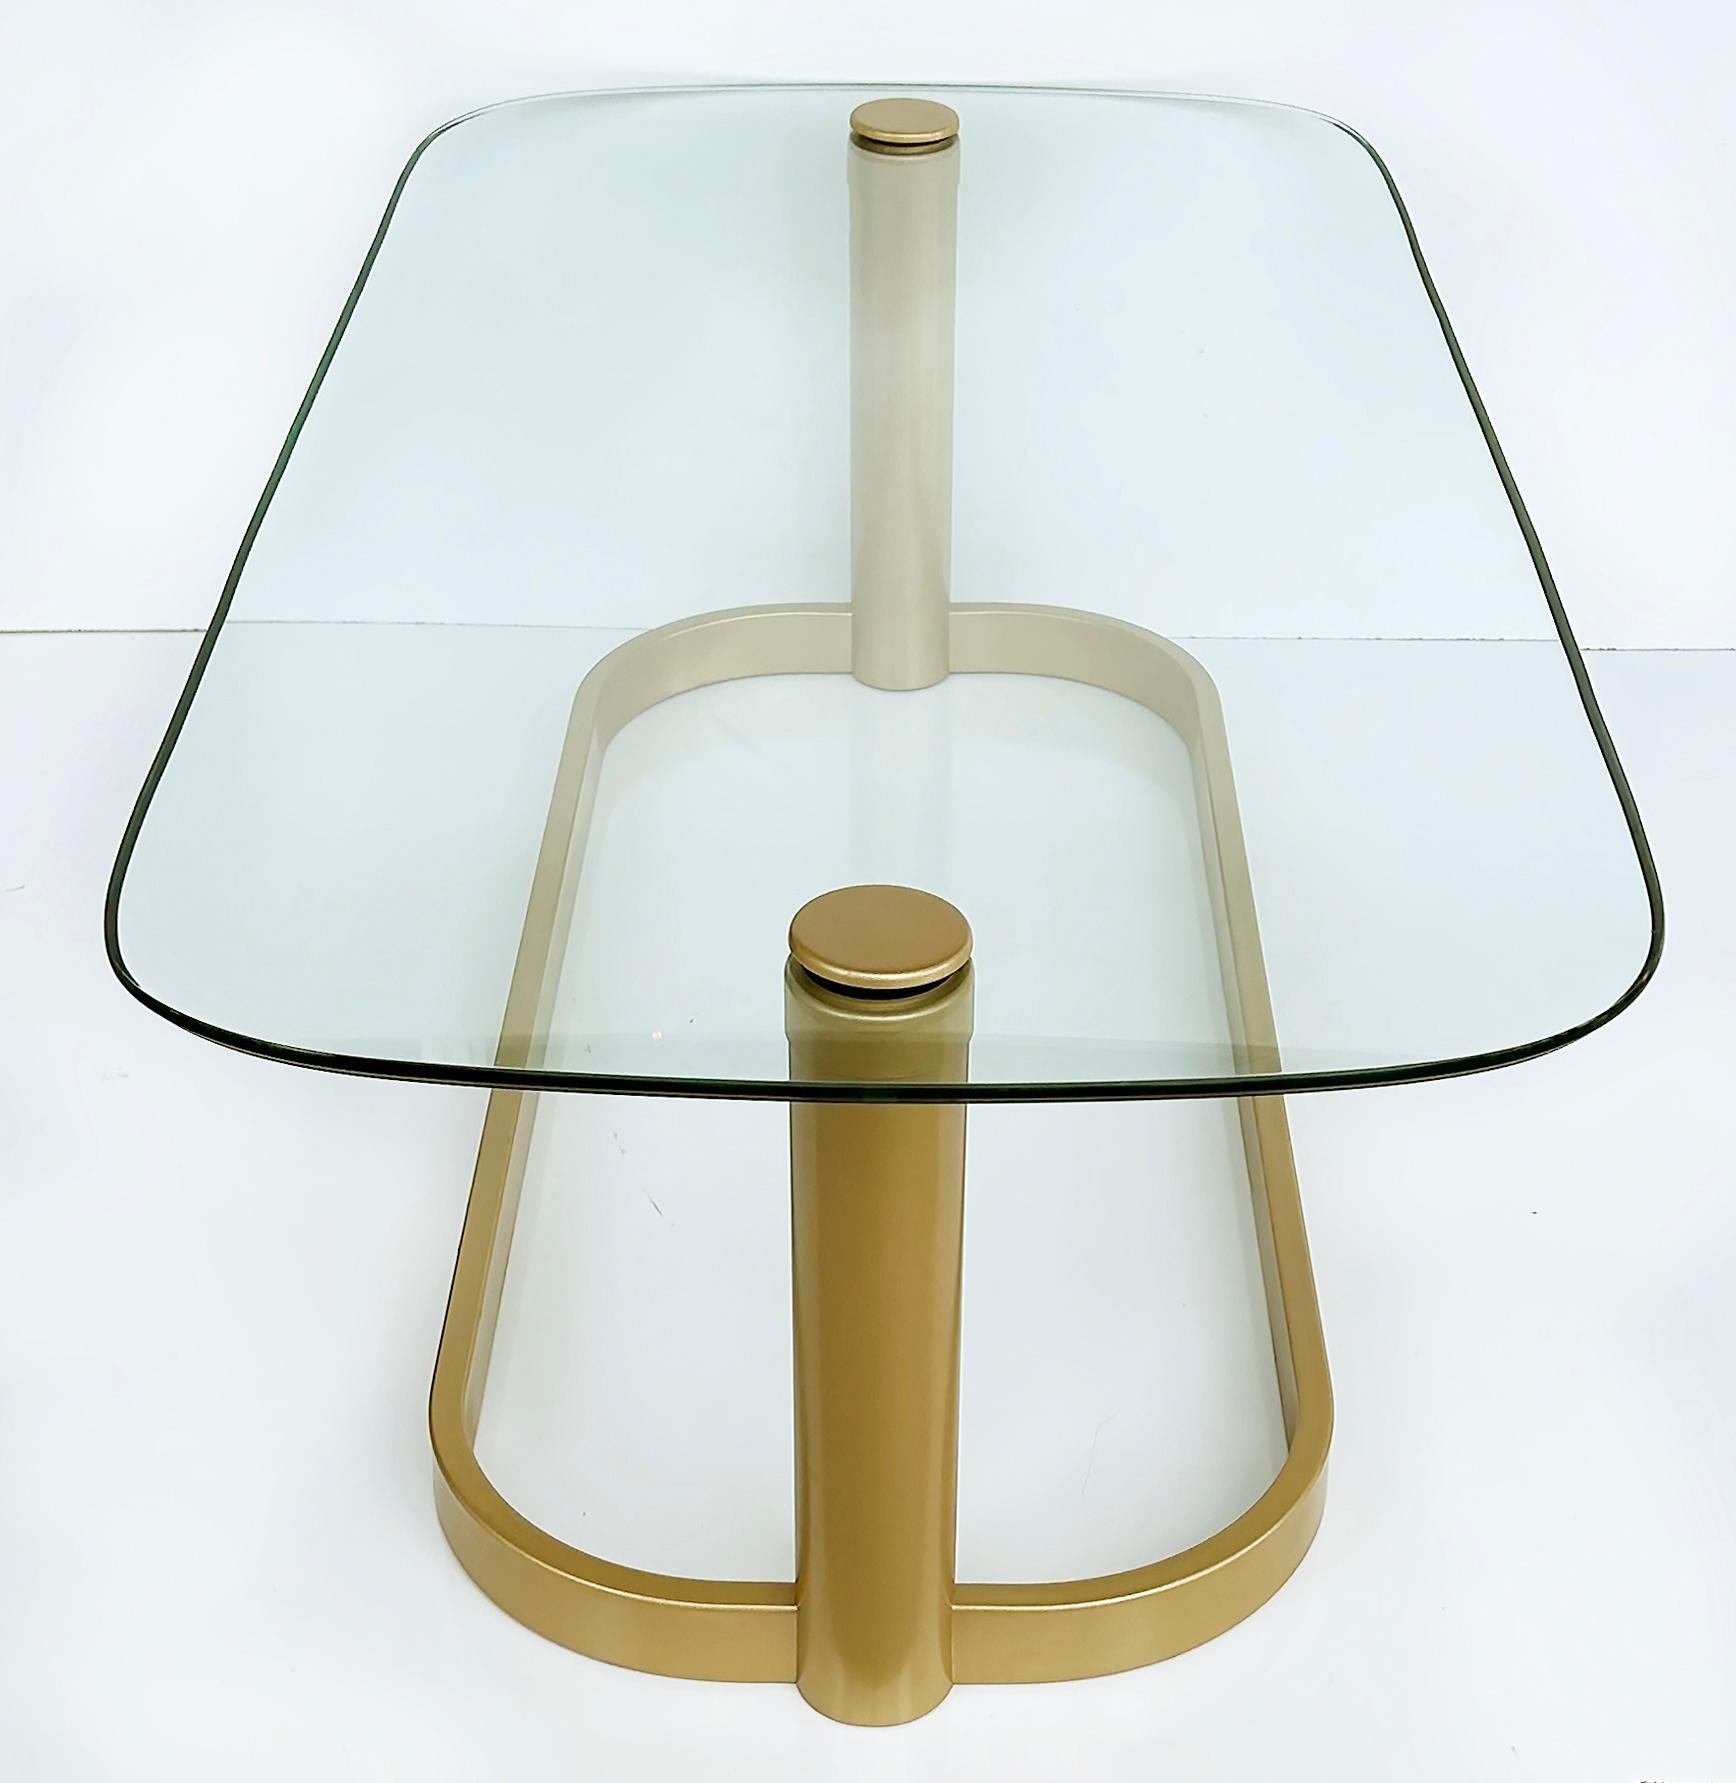 Painted Vintage Modern Glass Top Coffee Table, Rounded Edges, Metal Base For Sale